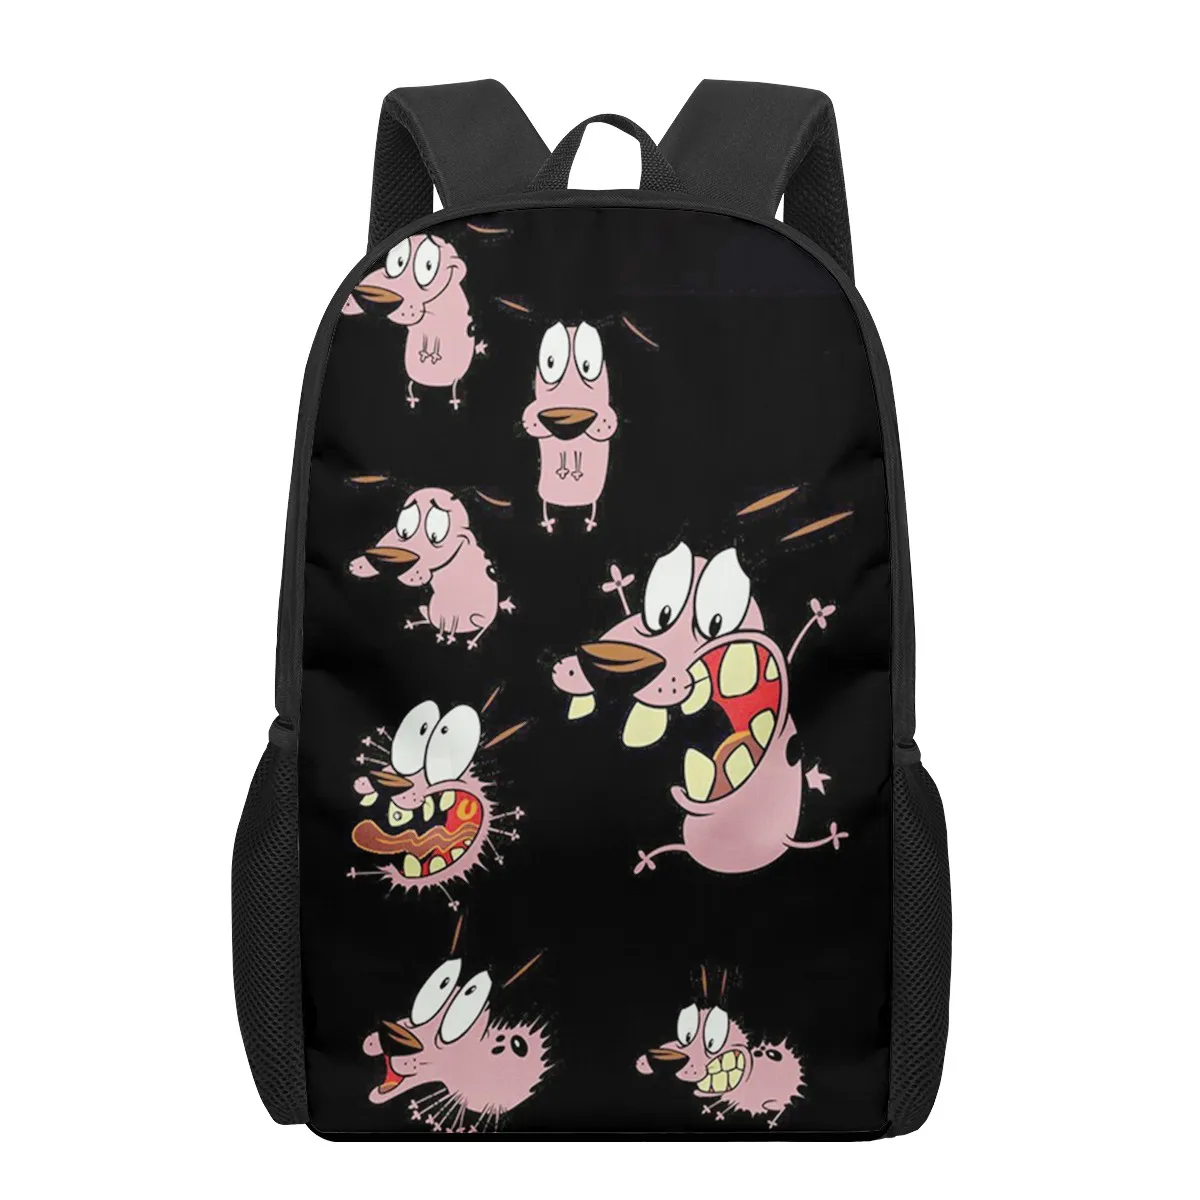 cartoon courage cowardly dog 3D Print School Bags for Boys Girls Primary Students Backpacks Kids Book Bag Satchel Back Pack